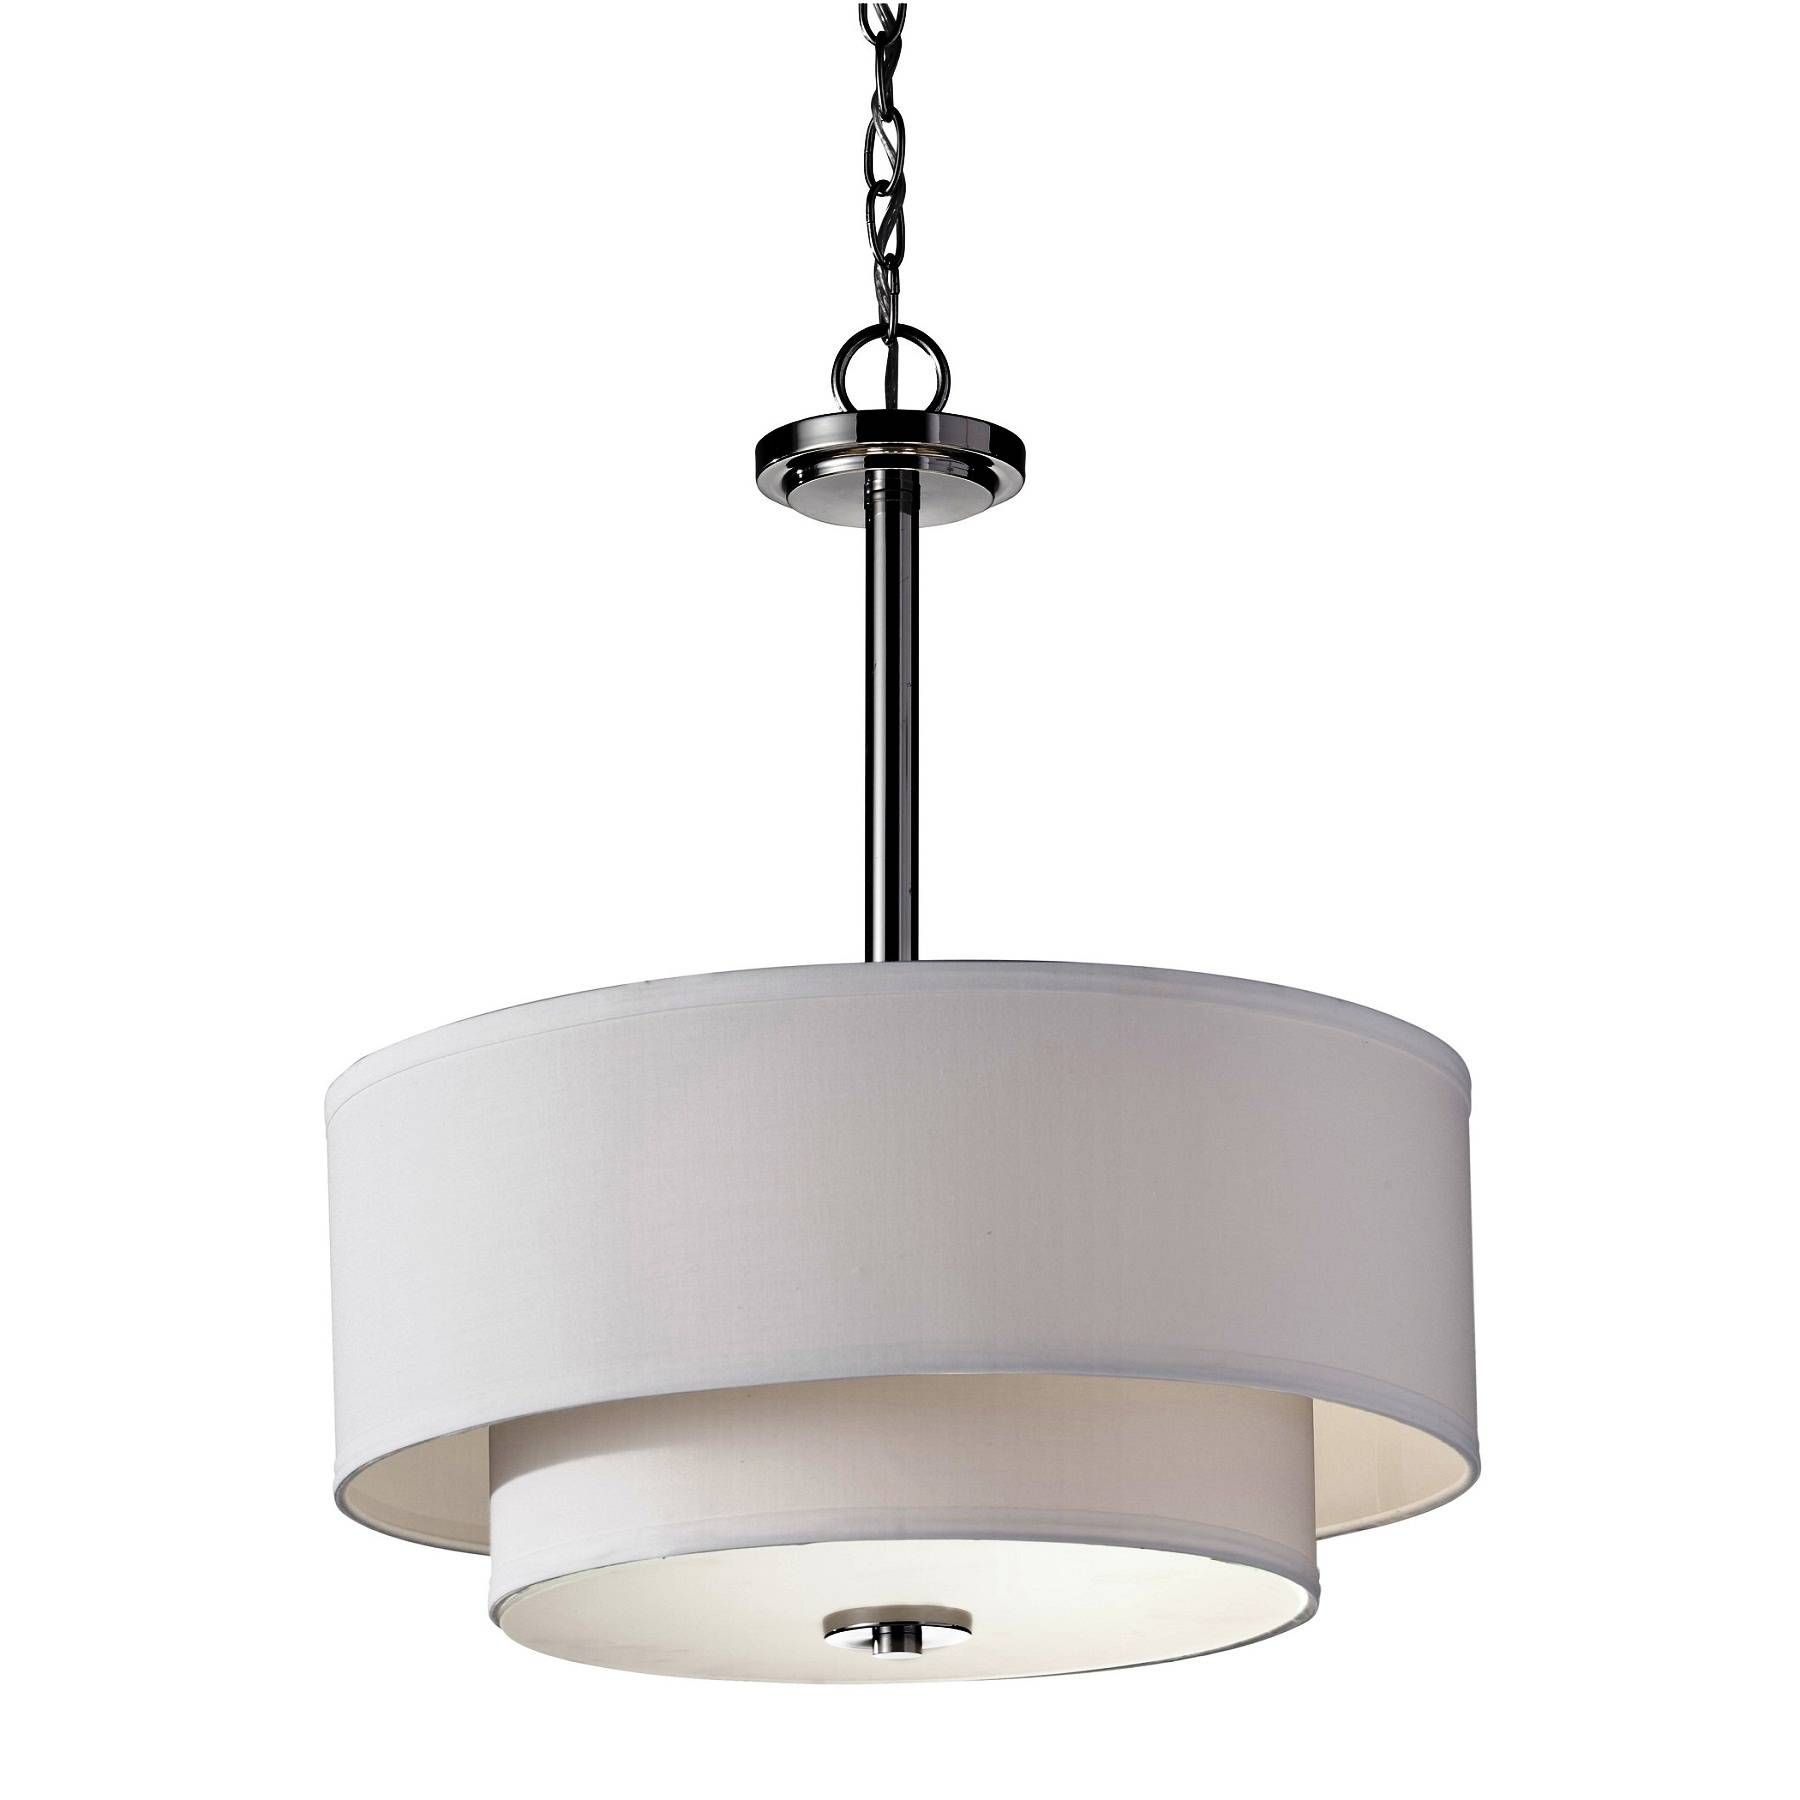 Tips To Use Drum Pendant Lighting | Design Ideas & Decors In White Drum Pendants (View 12 of 15)